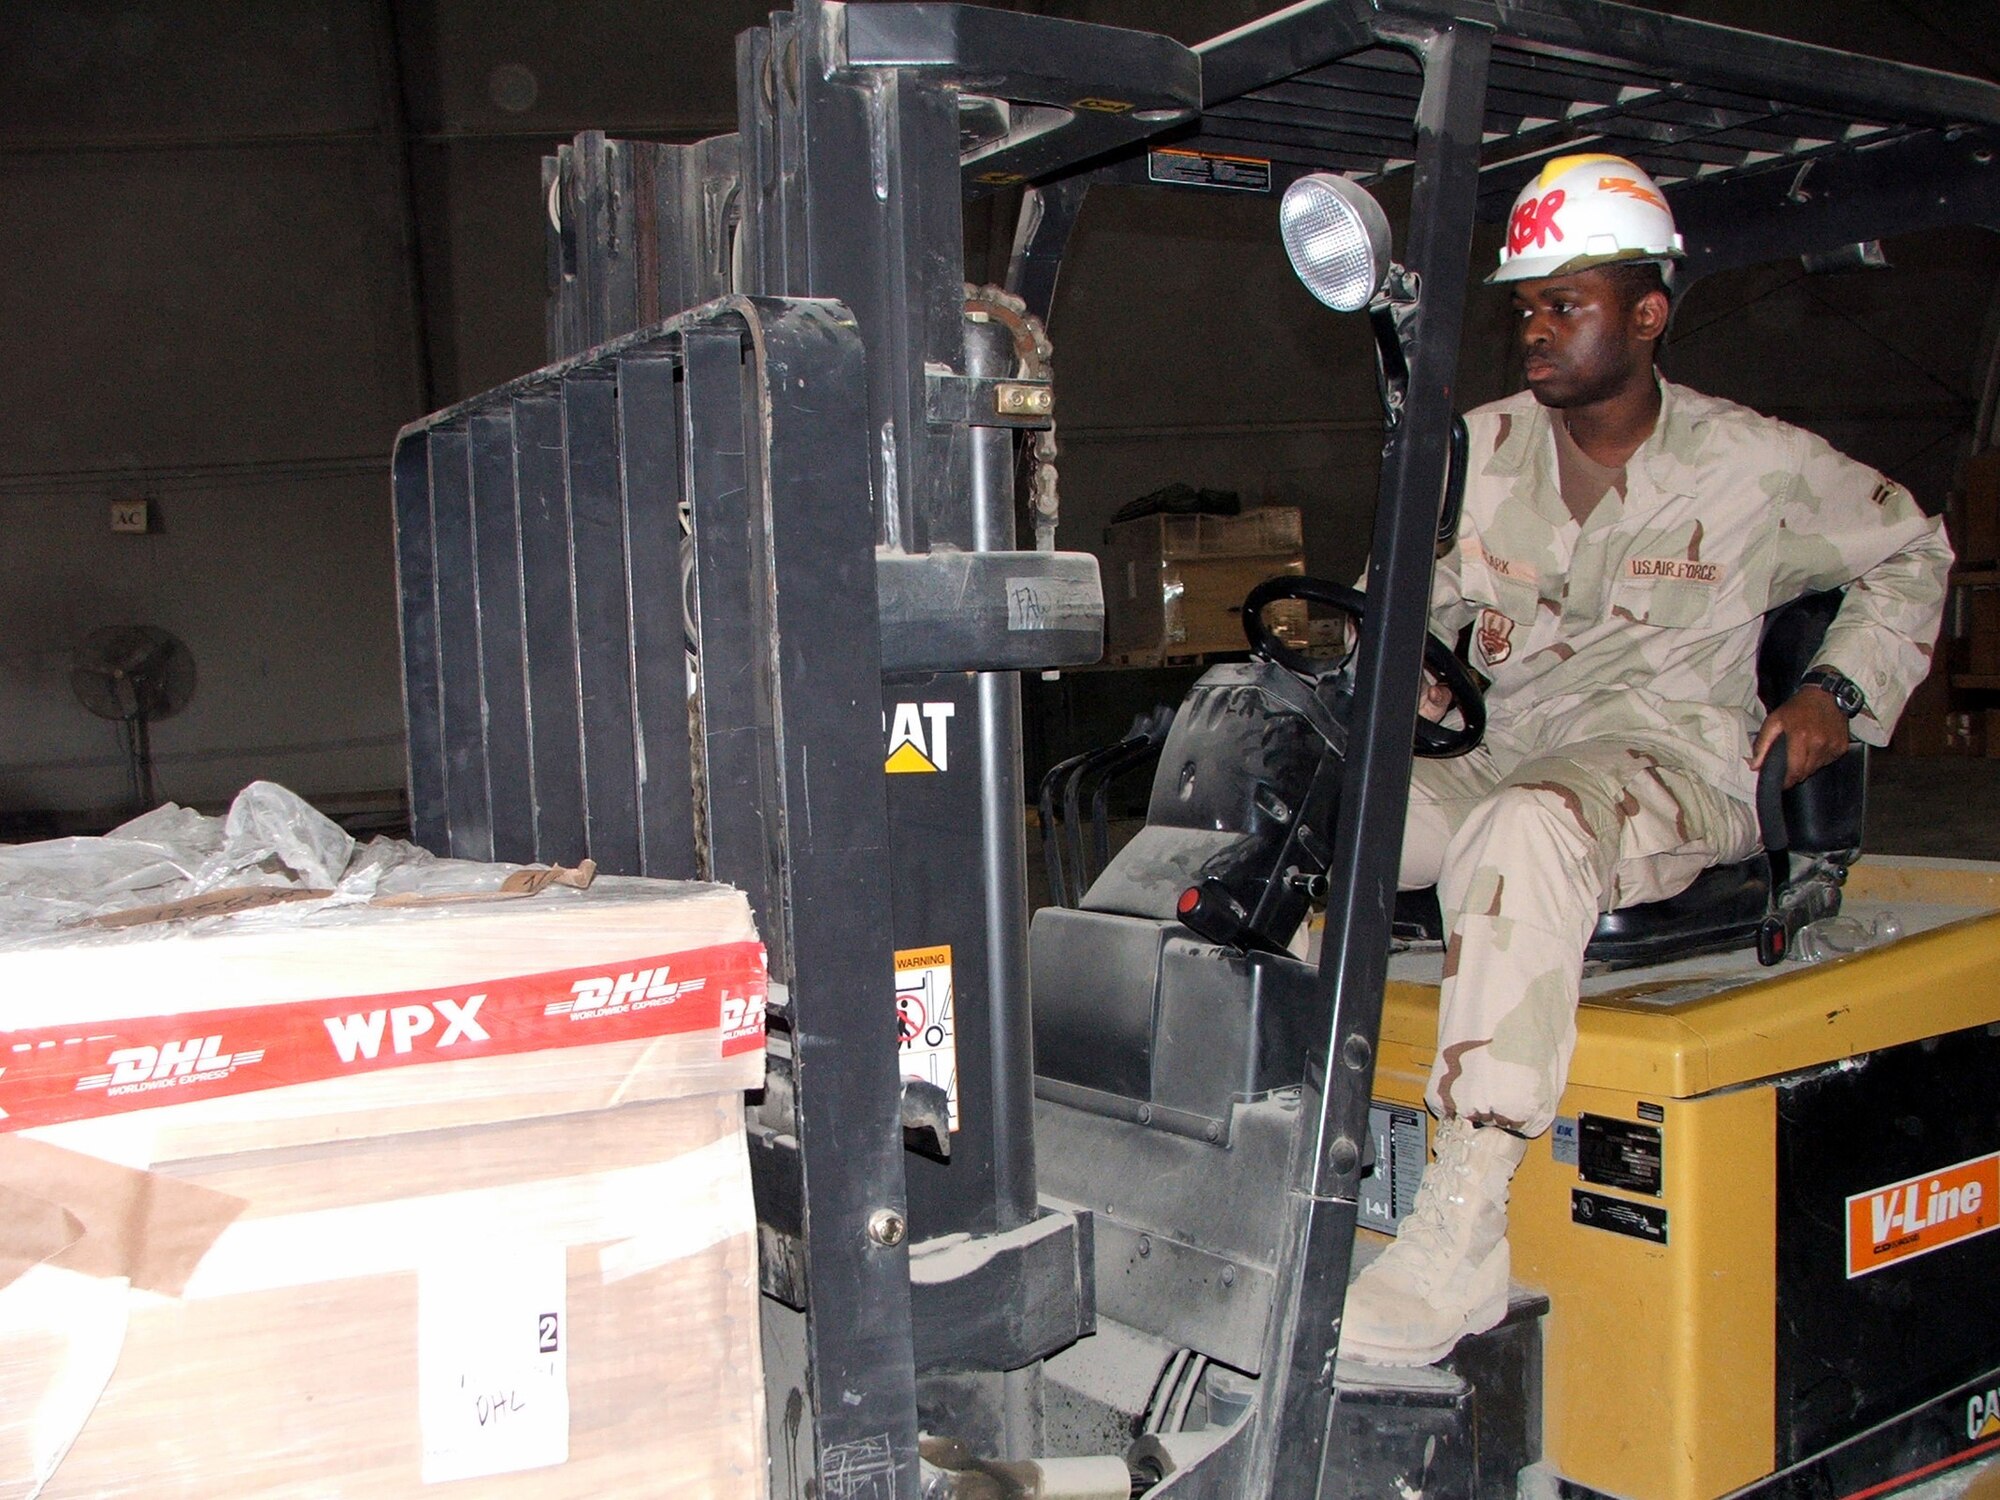 KARSHI-KHANABAD AIR BASE, Uzbekistan -- Airman 1st Class Jerome Clark moves cargo in the supply warehouse here April 26.  He is assigned to the 416th Expeditionary Mission Support Squadron's supply section and is deployed from Grand Forks Air Force Base, N.D.  (U.S. Air Force photo by Tech. Sgt. Scott T. Sturkol)